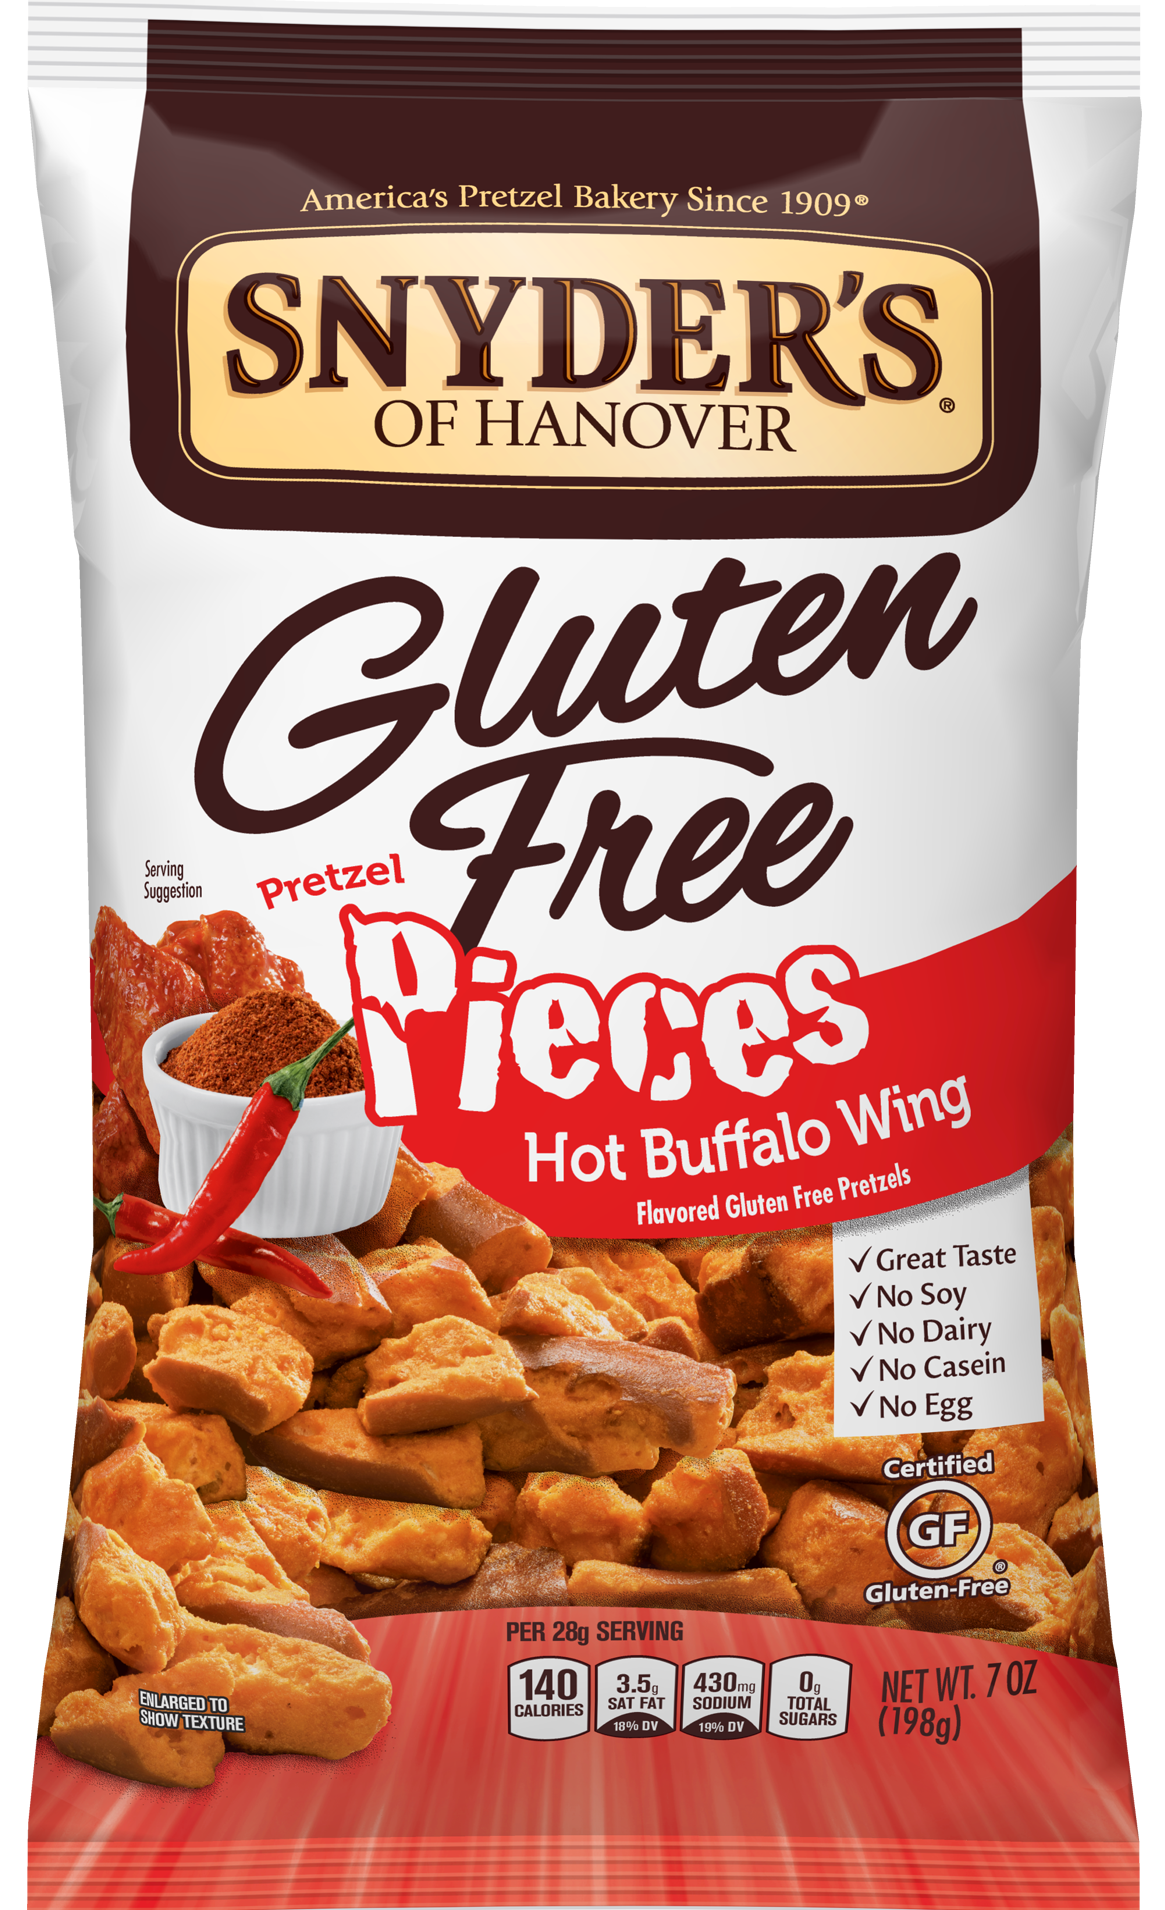 Hot Buffalo Wing Pieces - Snyder's